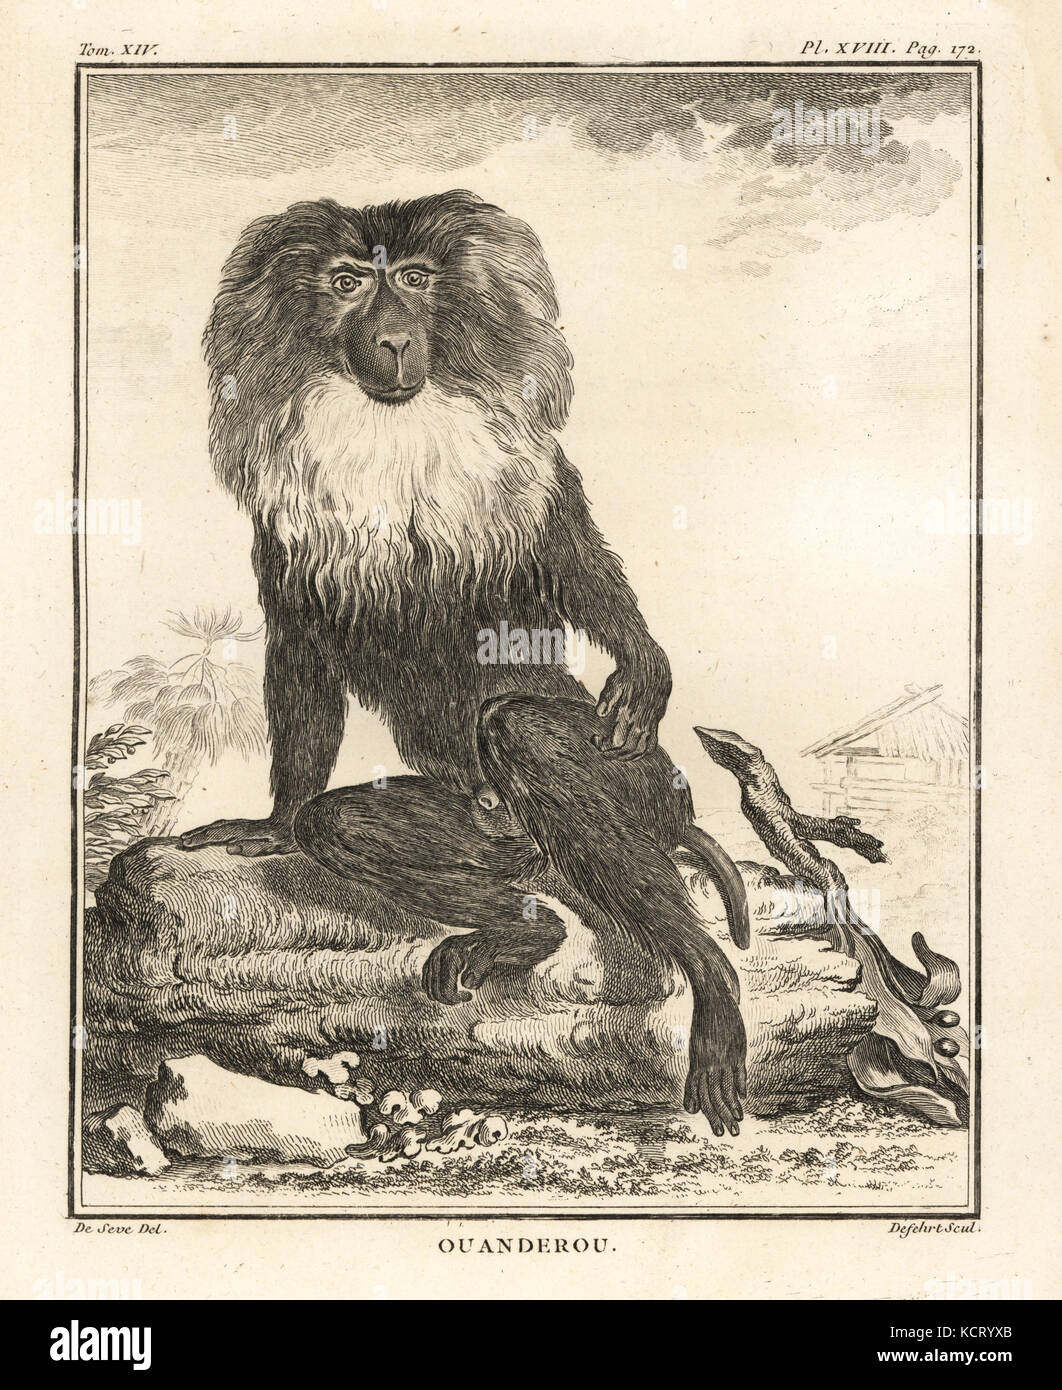 Lion-tailed macaque or wanderoo, Macaca silenus. Endandered. Ouanderou. Copperplate engraving by Defehrt after an illustration by Jacques de Seve from Georges-Louis Leclerc, Comte de Buffon's Histoire Naturelle, Imprimerie Royale, Paris, 1766. Stock Photo